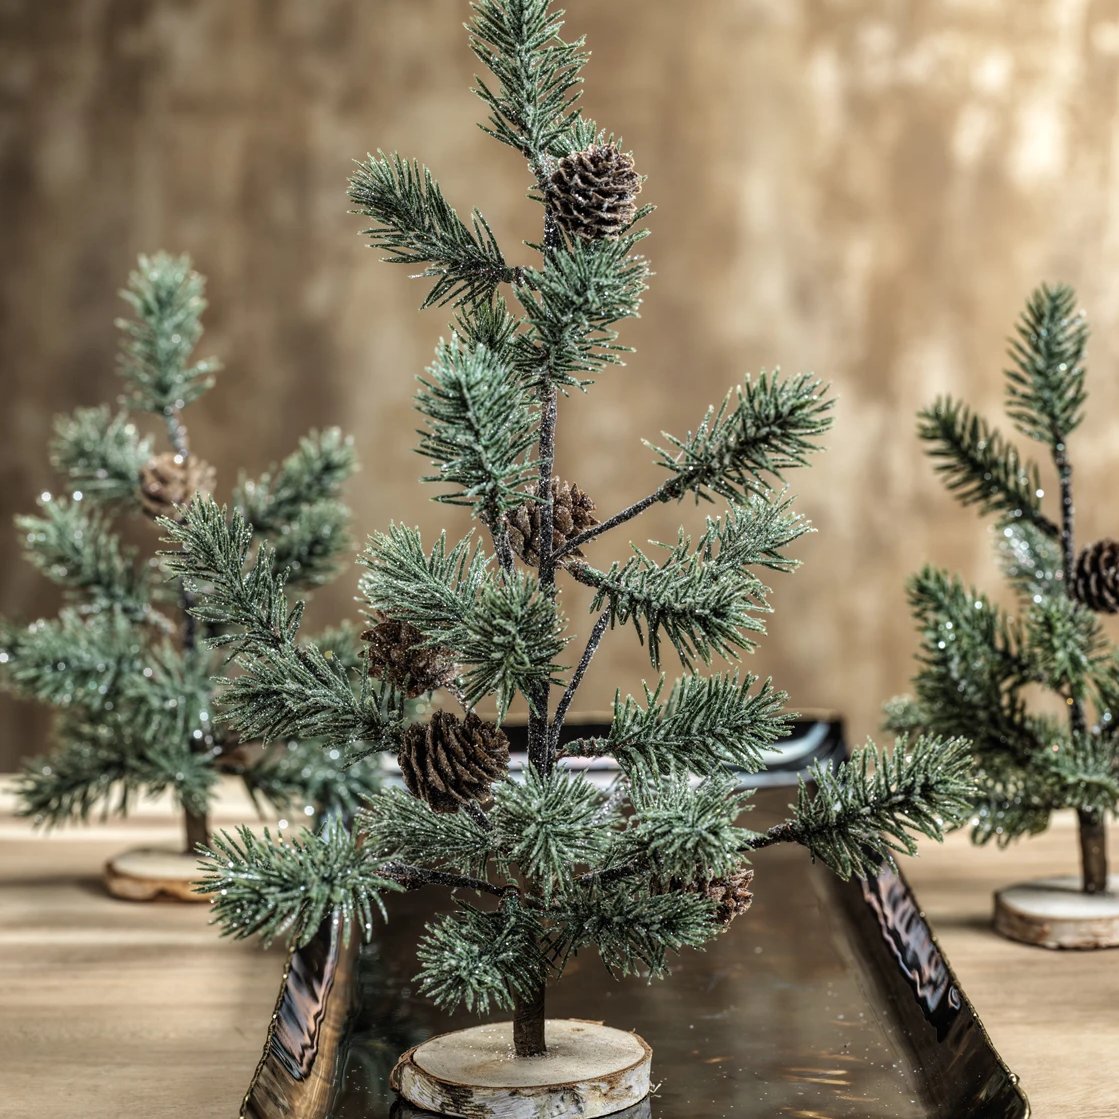 Carlyle Avenue | Needle Pine Tree with Small Pine Cones Large | Zodax